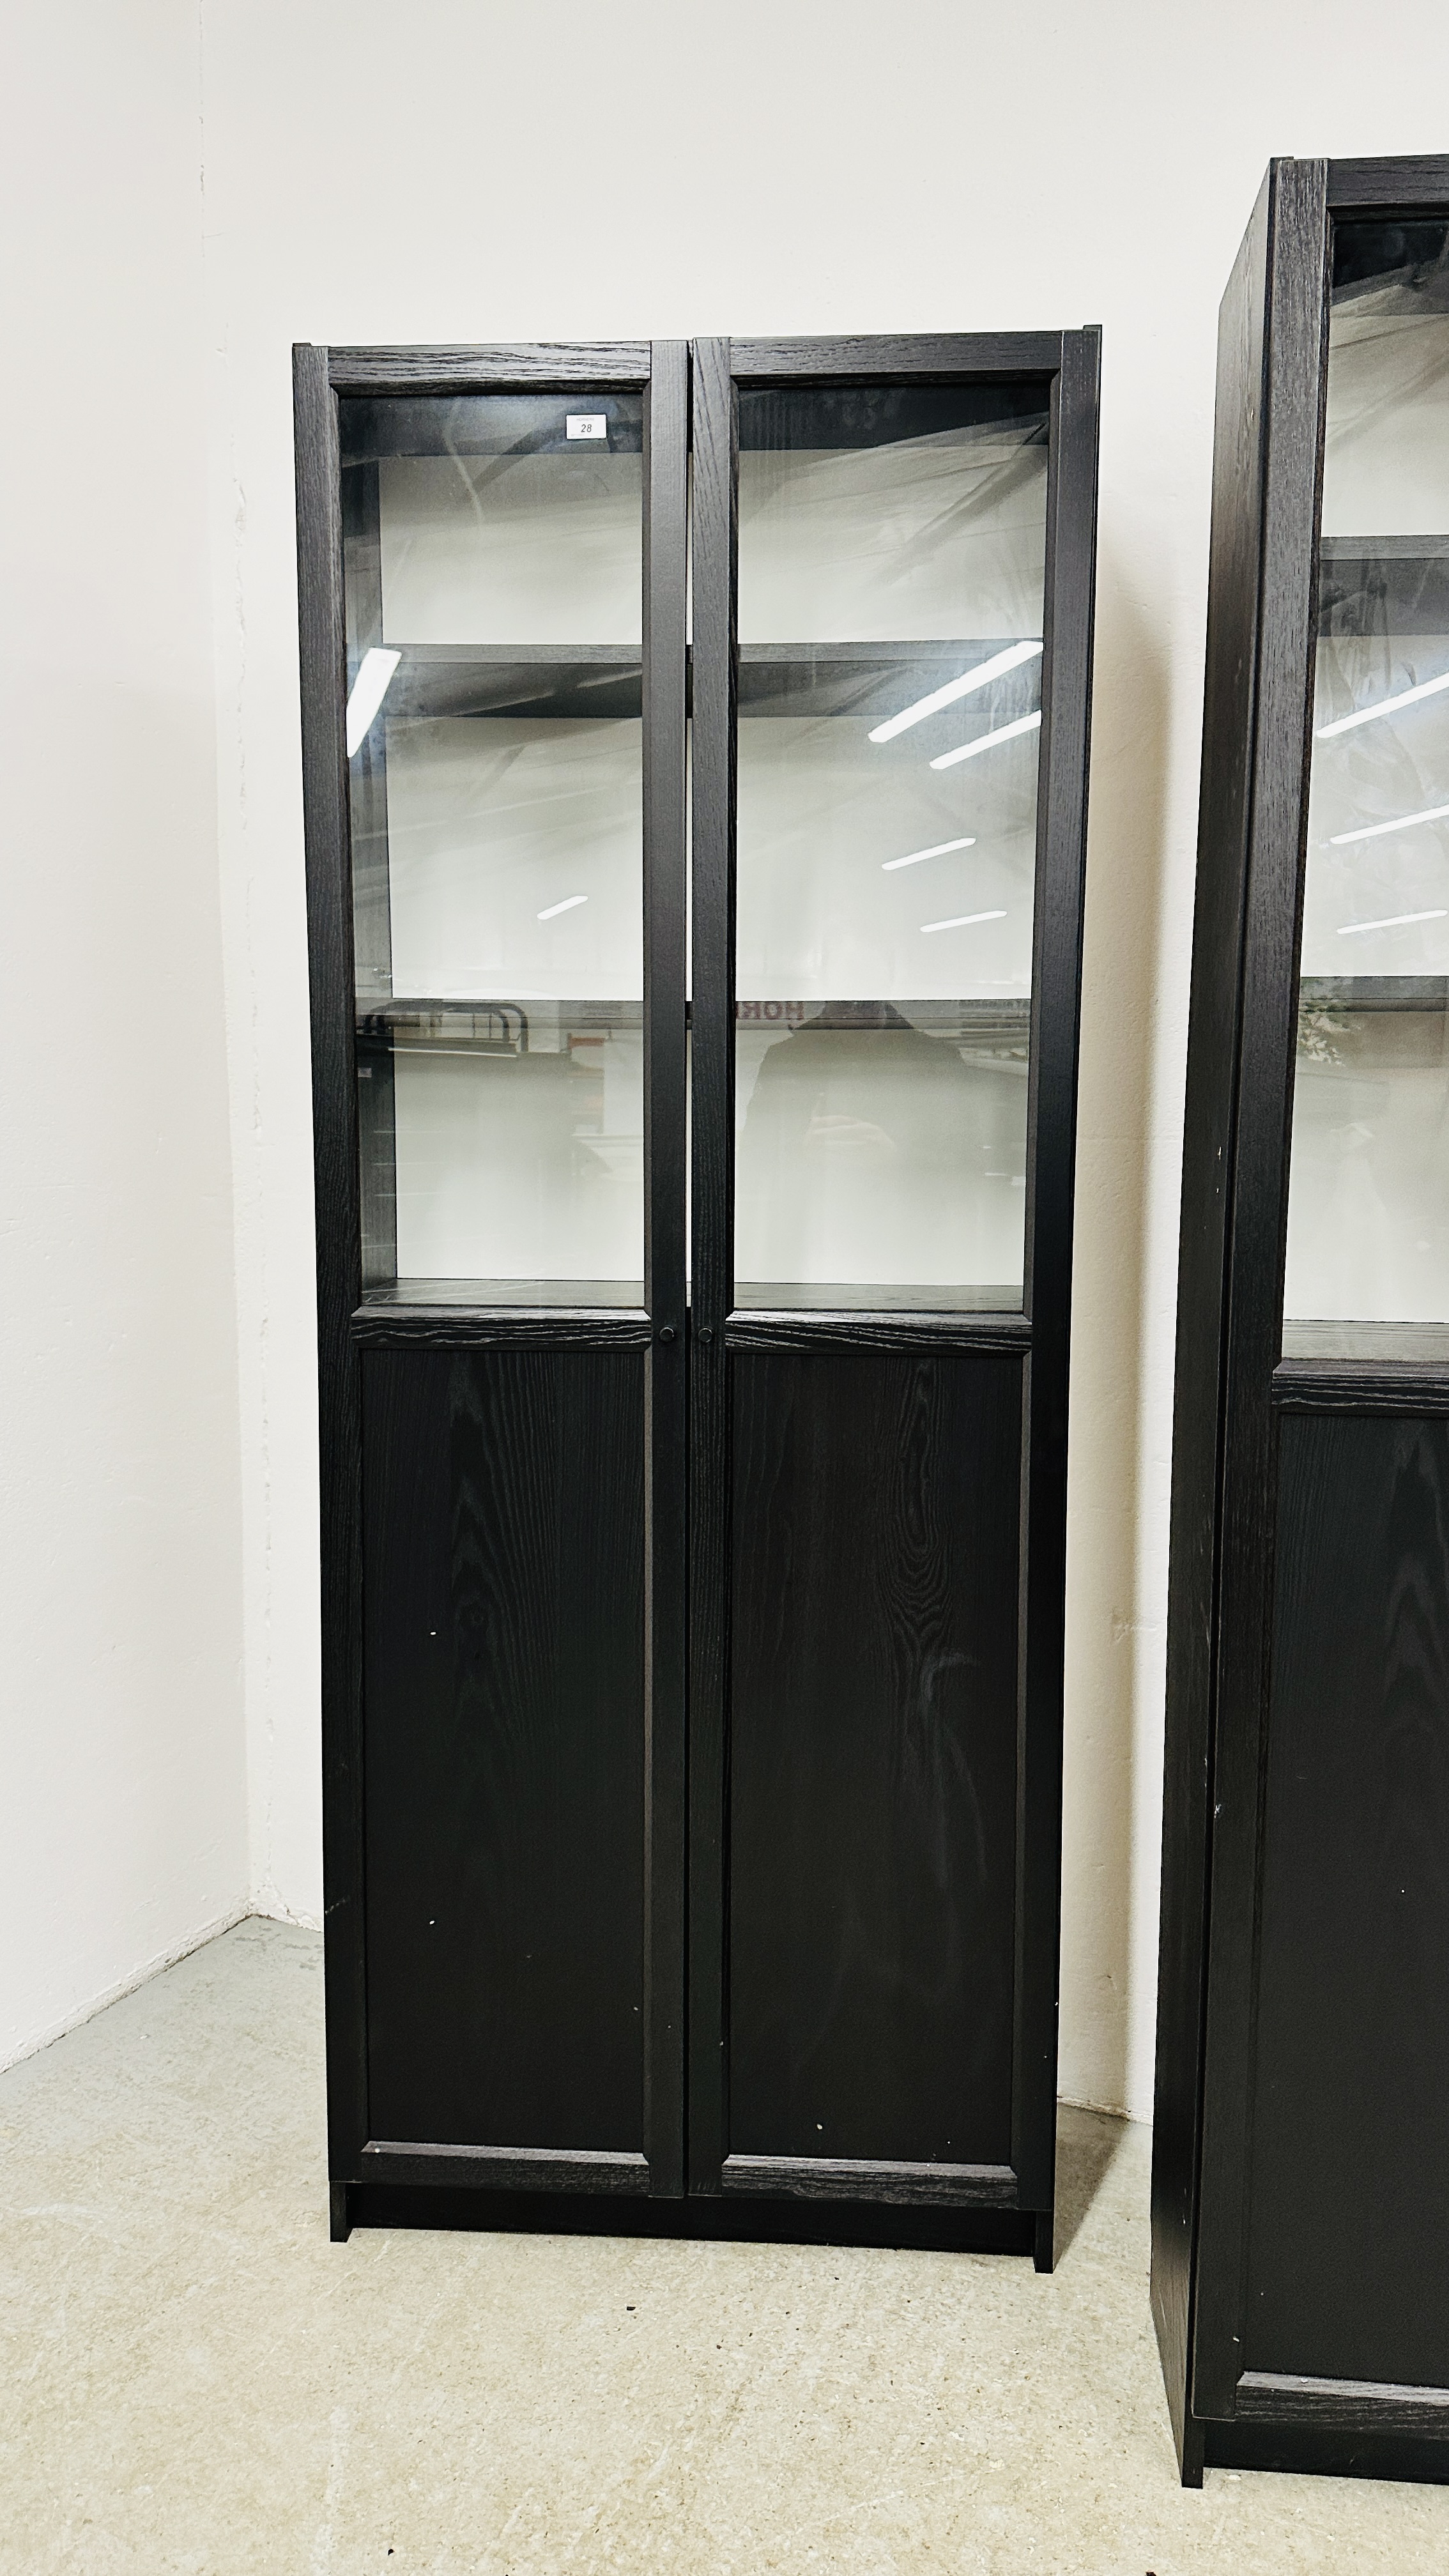 2 X MODERN BLACK ASH EFFECT FINISH FULL HEIGHT WALL CABINETS WITH GLAZED TOPS EACH W 80CM, D 30CM, - Image 3 of 8